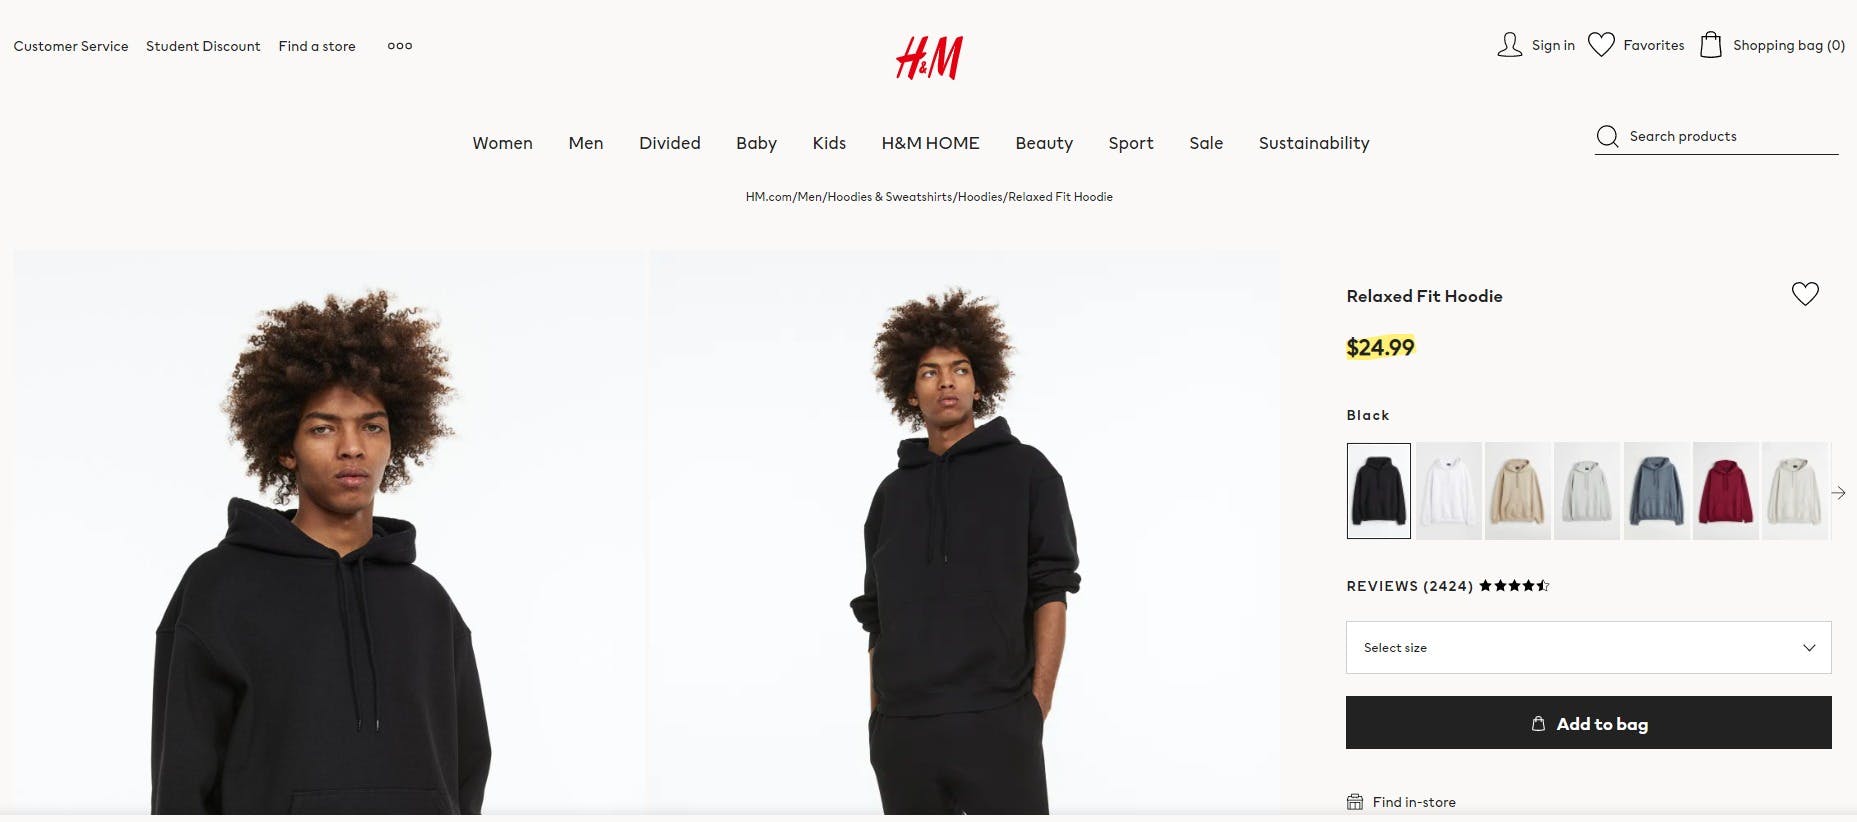 H&M has a Style with feature on their website